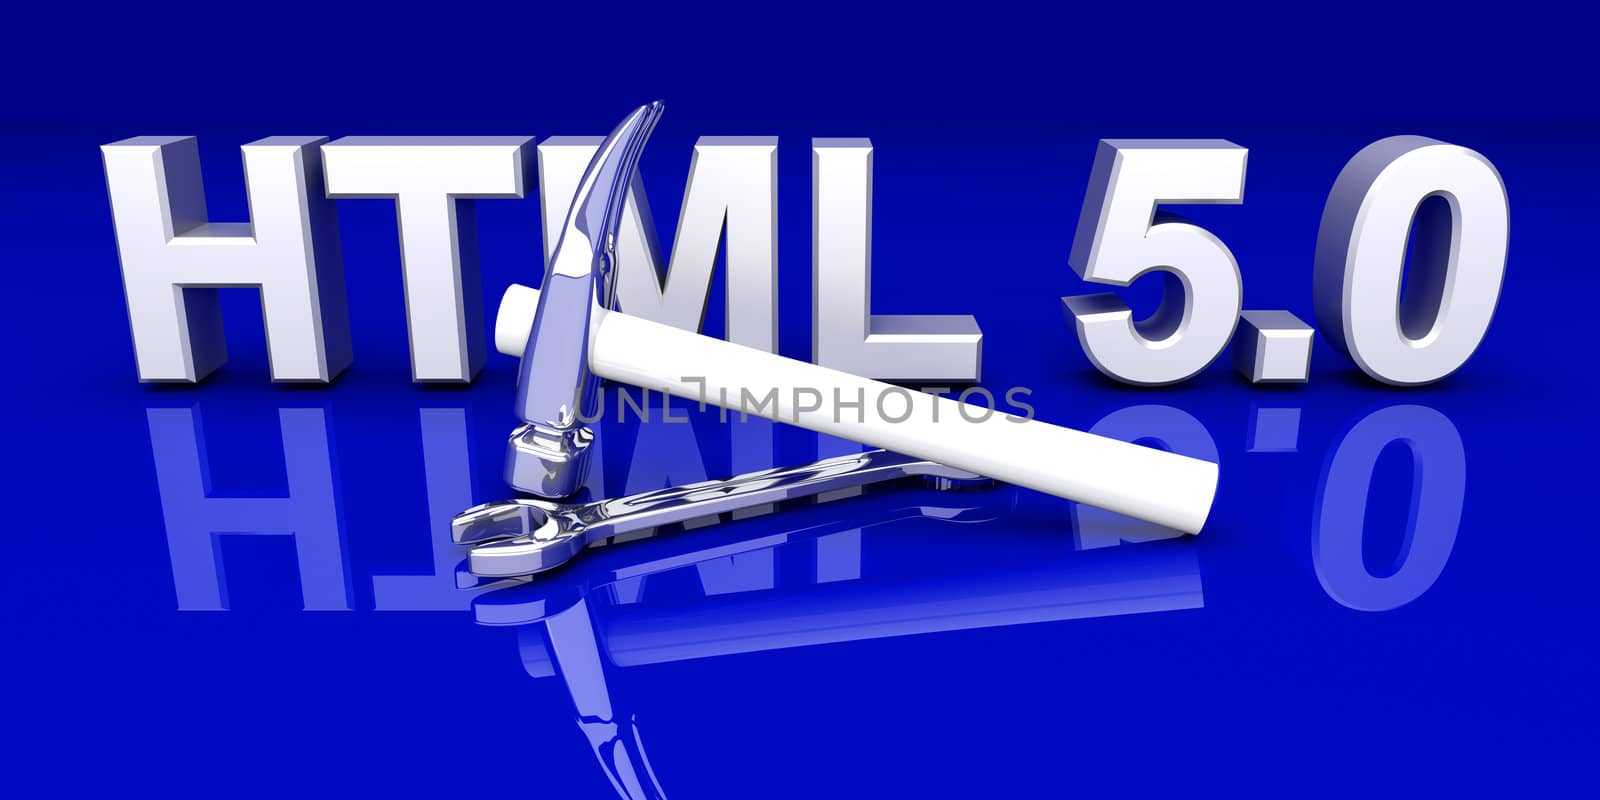 HTML 5.0 Tools by Spectral